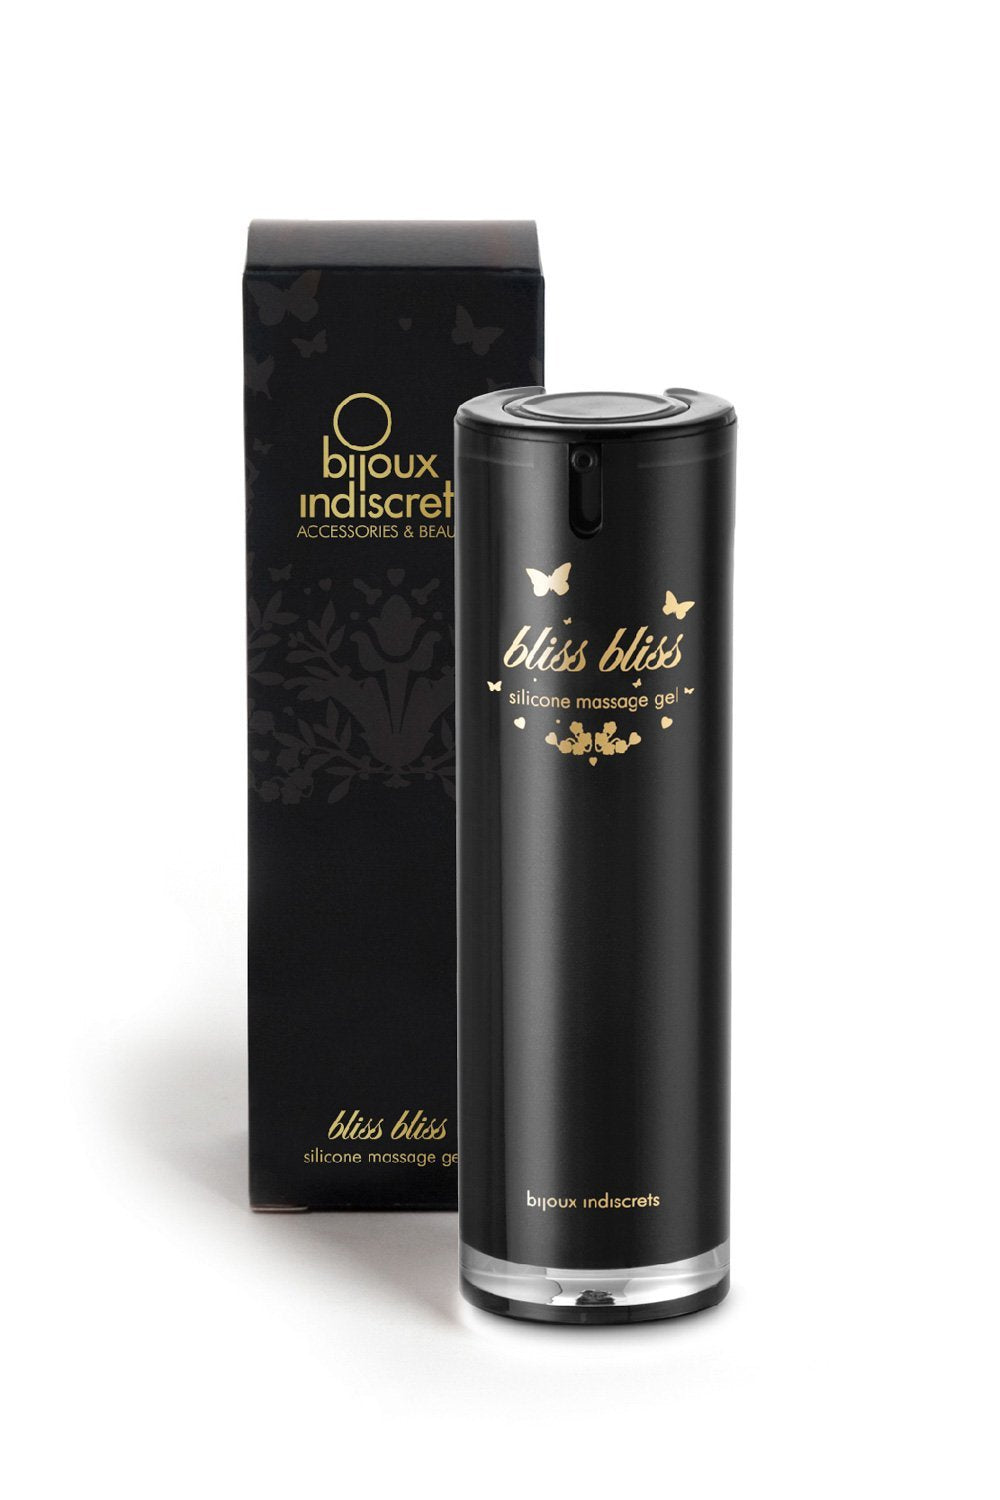 Bijoux Indiscrets Bliss Bliss Massage Gel At The Hosiery Box The Hosiery Box